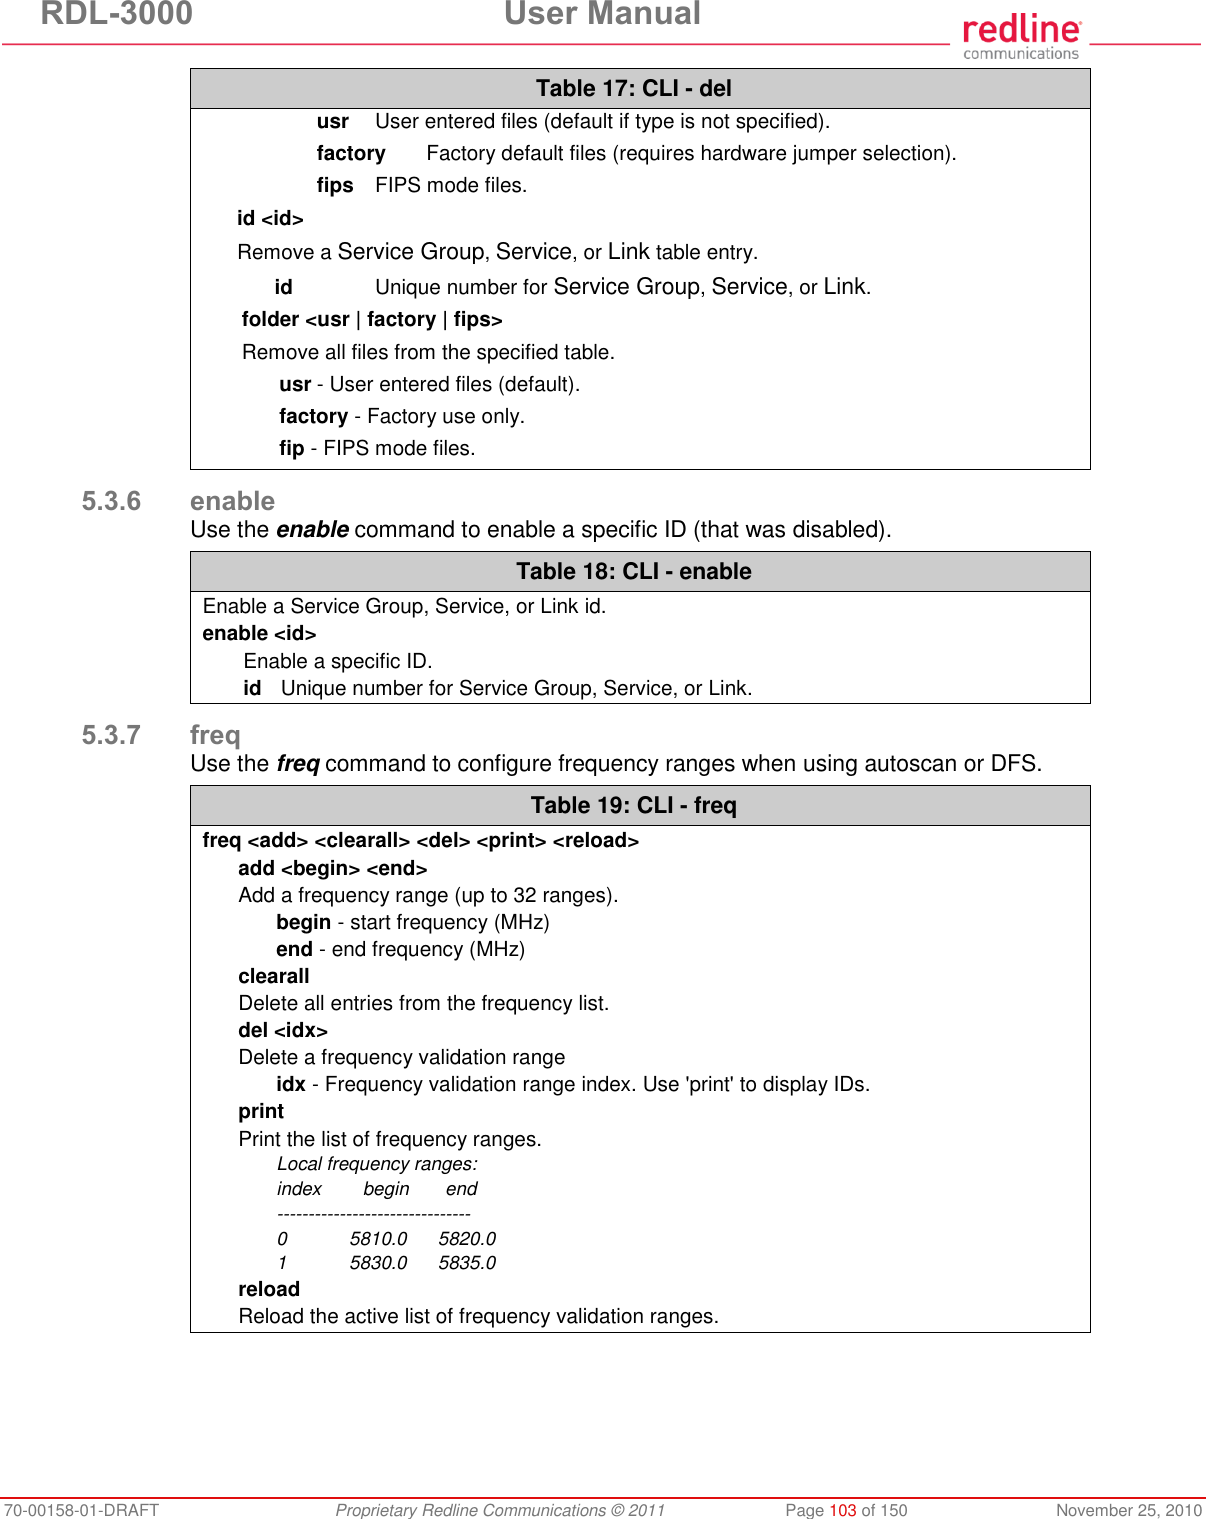 RDL-3000  User Manual 70-00158-01-DRAFT  Proprietary Redline Communications © 2011  Page 103 of 150  November 25, 2010 Table 17: CLI - del  usr  User entered files (default if type is not specified).  factory  Factory default files (requires hardware jumper selection).  fips  FIPS mode files.  id &lt;id&gt; Remove a Service Group, Service, or Link table entry.  id  Unique number for Service Group, Service, or Link. folder &lt;usr | factory | fips&gt; Remove all files from the specified table. usr - User entered files (default). factory - Factory use only. fip - FIPS mode files.  5.3.6 enable Use the enable command to enable a specific ID (that was disabled). Table 18: CLI - enable Enable a Service Group, Service, or Link id. enable &lt;id&gt; Enable a specific ID. id  Unique number for Service Group, Service, or Link.  5.3.7 freq Use the freq command to configure frequency ranges when using autoscan or DFS. Table 19: CLI - freq freq &lt;add&gt; &lt;clearall&gt; &lt;del&gt; &lt;print&gt; &lt;reload&gt; add &lt;begin&gt; &lt;end&gt; Add a frequency range (up to 32 ranges).  begin - start frequency (MHz)  end - end frequency (MHz) clearall Delete all entries from the frequency list. del &lt;idx&gt; Delete a frequency validation range  idx - Frequency validation range index. Use &apos;print&apos; to display IDs. print Print the list of frequency ranges.   Local frequency ranges:   index        begin       end  -------------------------------   0            5810.0      5820.0   1            5830.0      5835.0 reload Reload the active list of frequency validation ranges.    